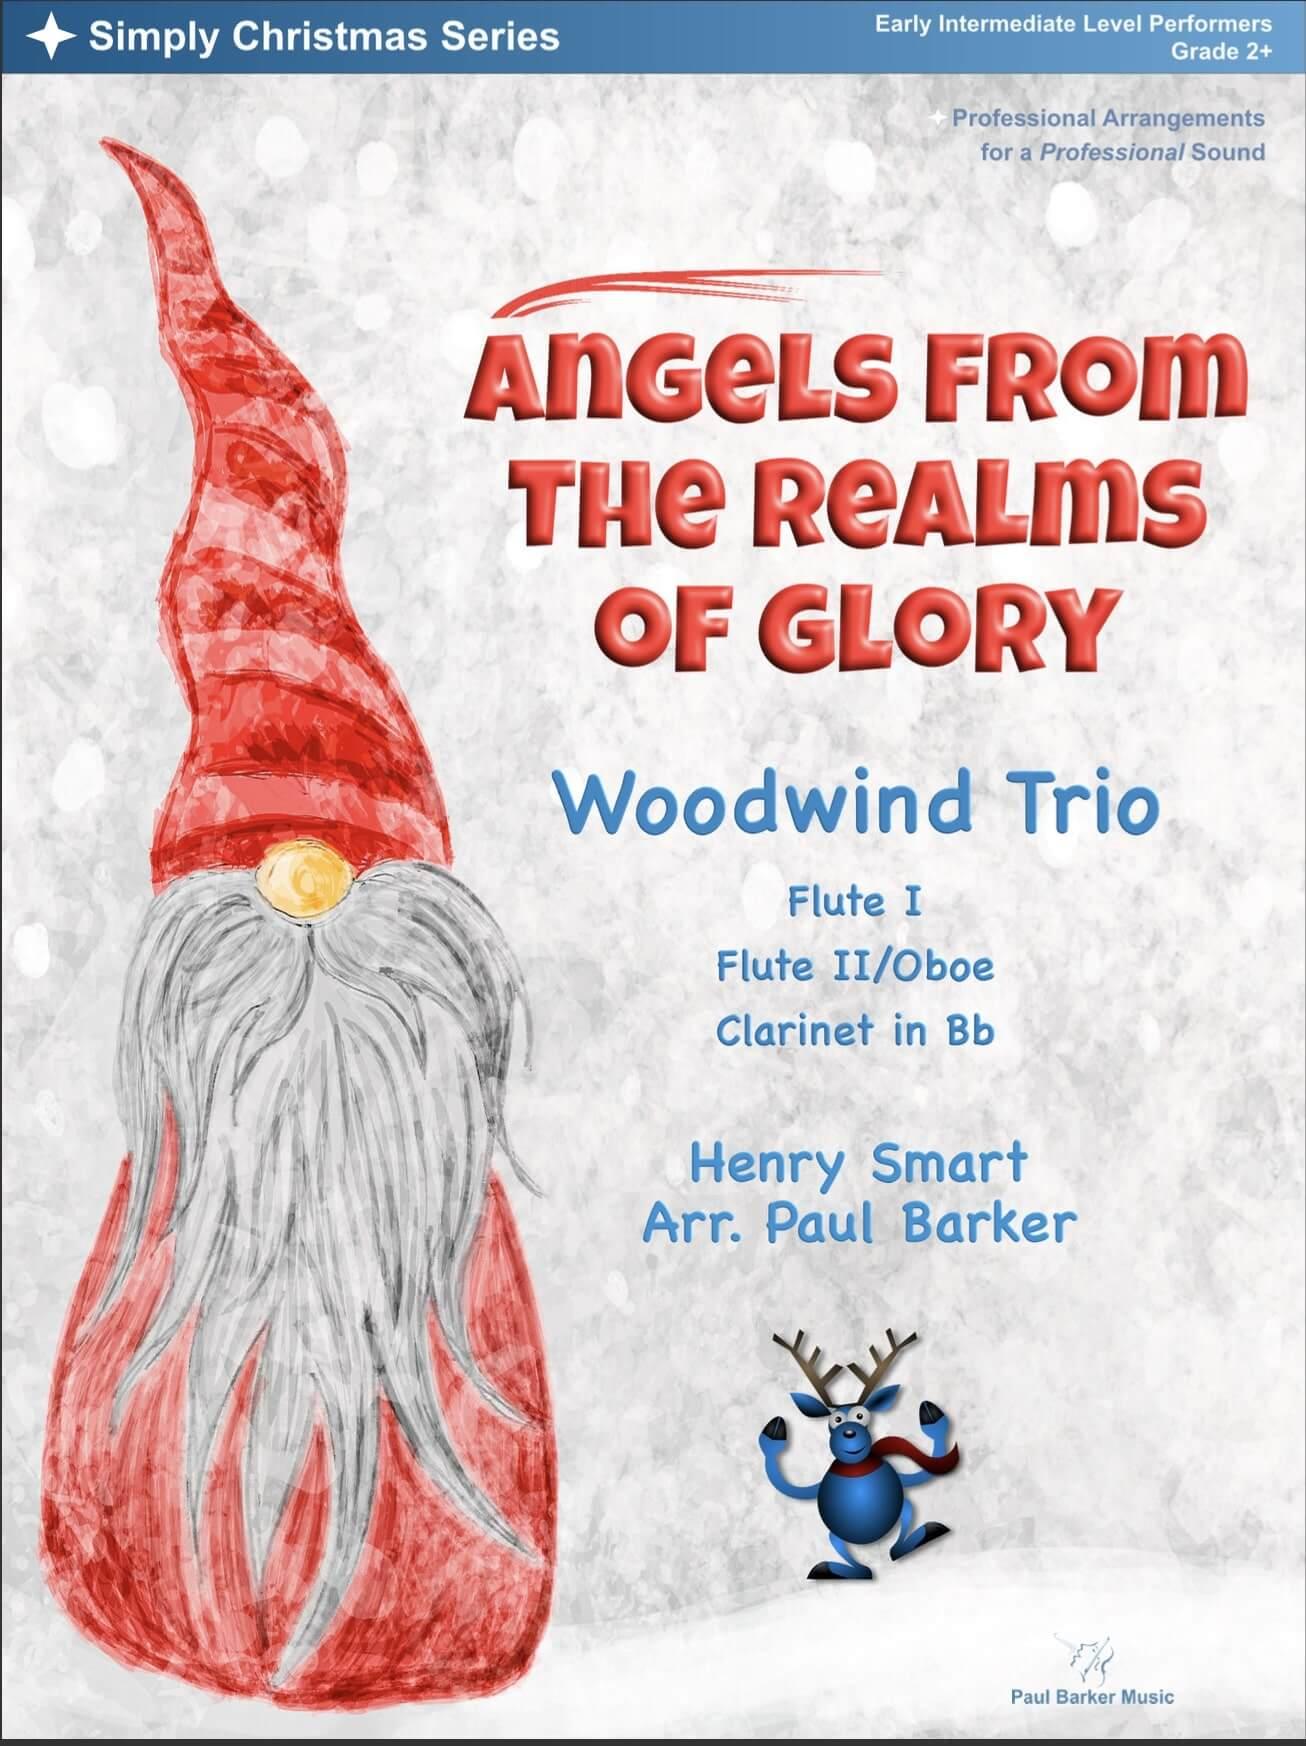 Angels From The Realms Of Glory (Woodwind Trio) - Paul Barker Music 